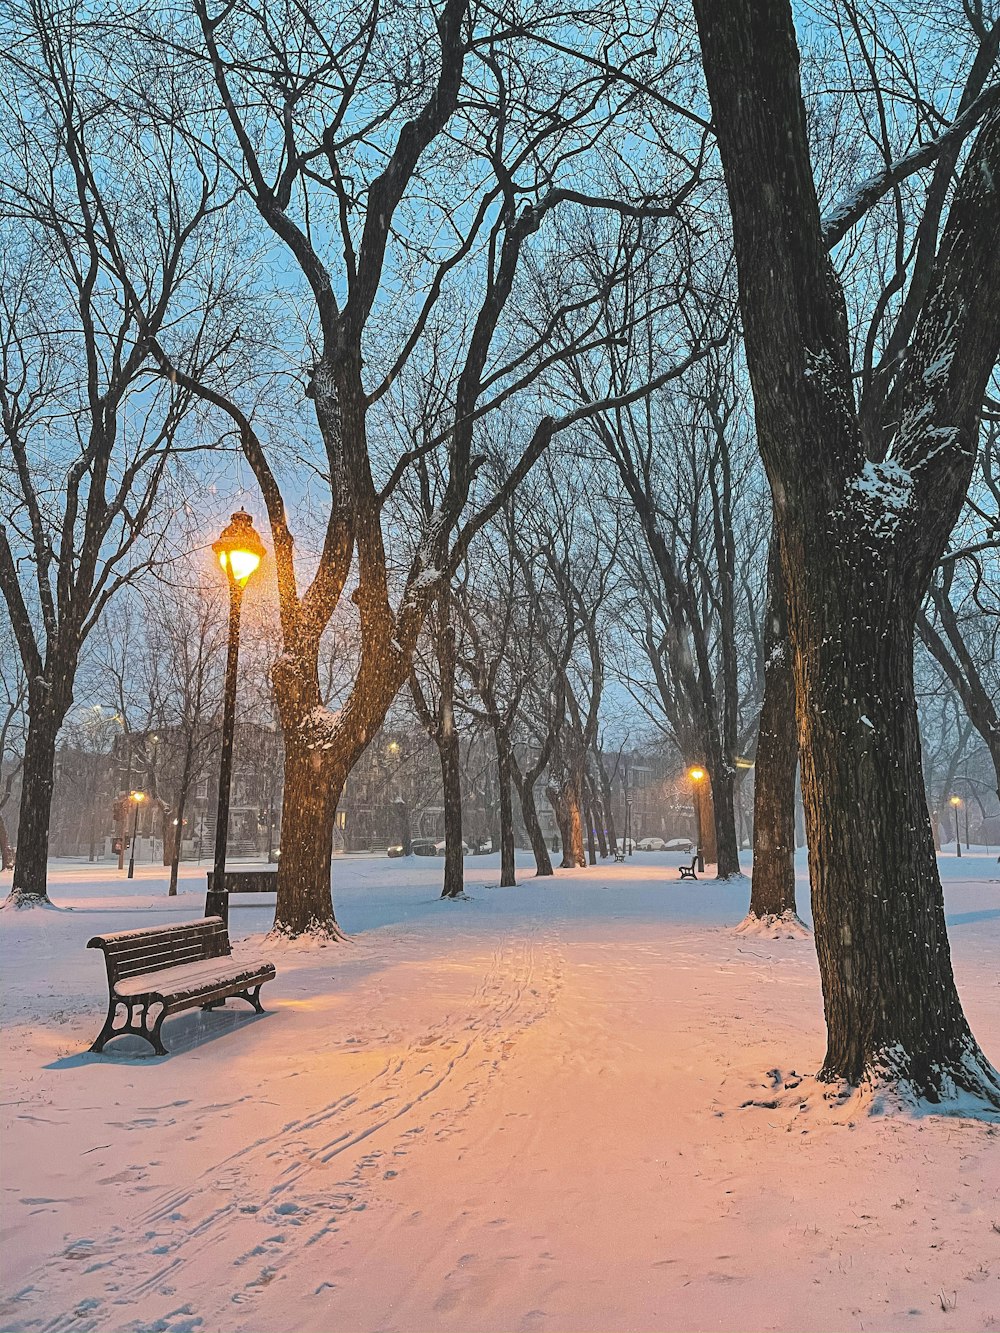 brown wooden bench on snow covered ground during night time